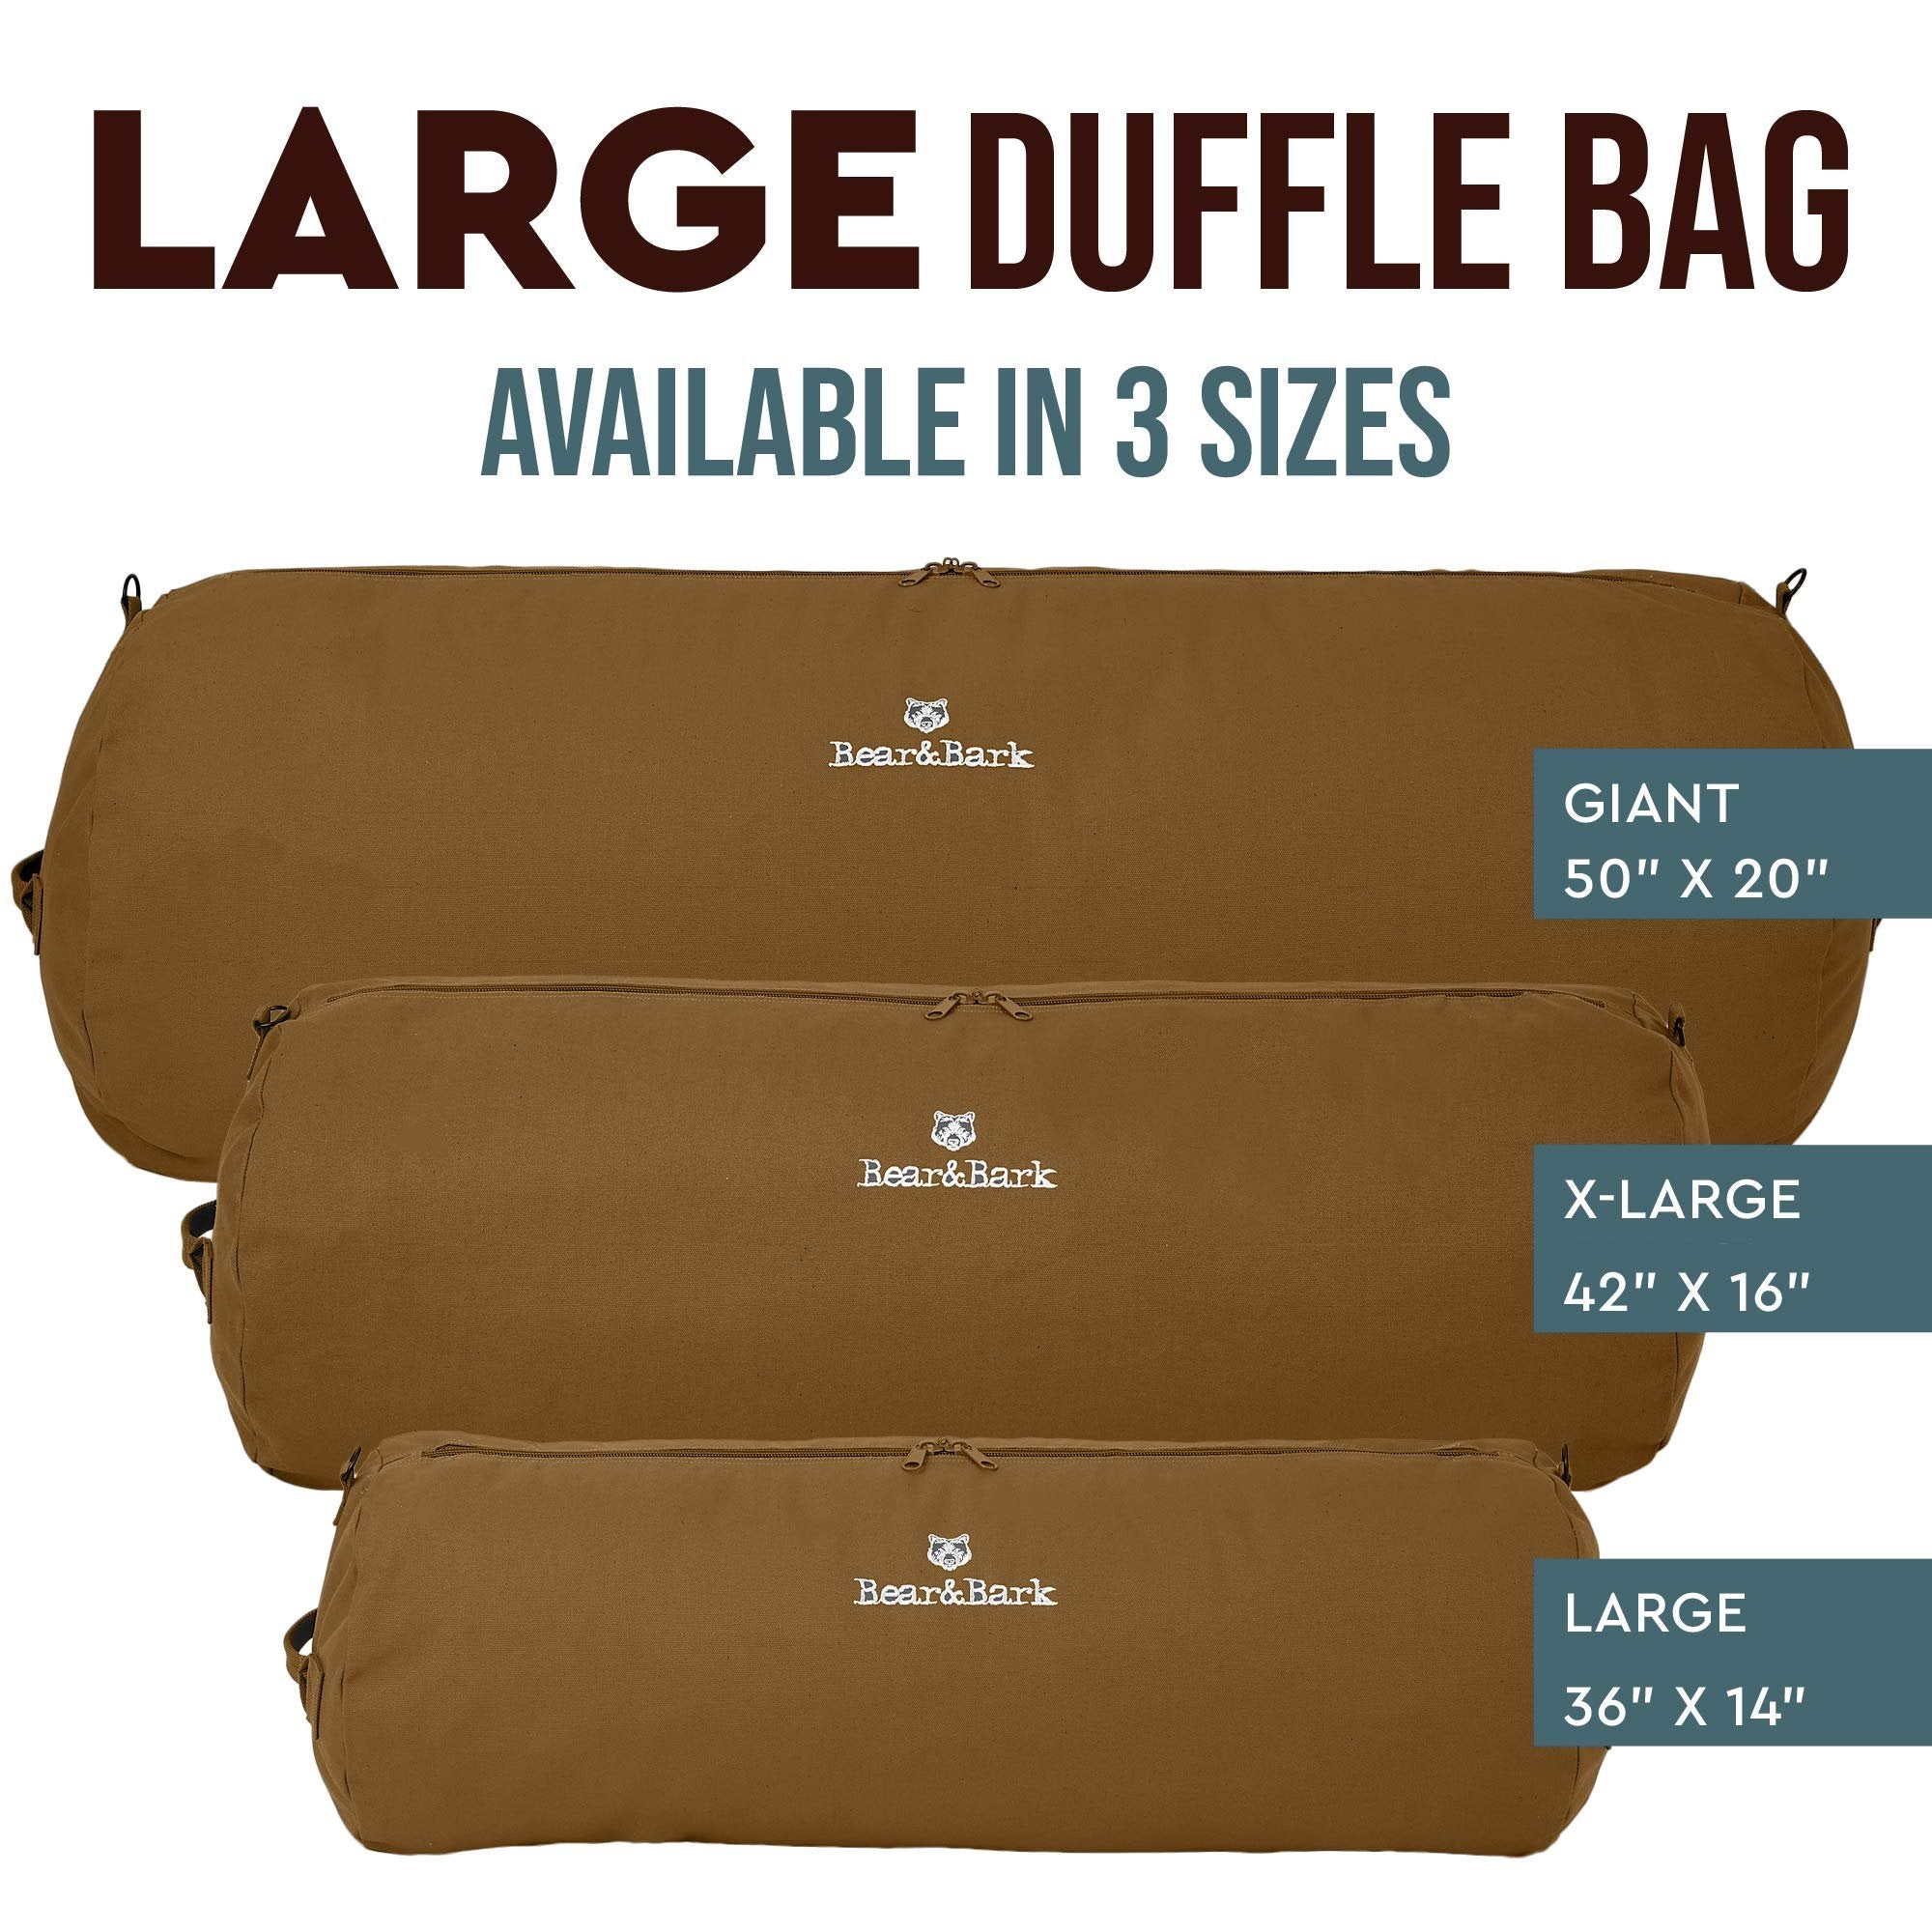 Large Duffle Bag - Desert Brown 50"x20" - 257L - Extra Large Canvas Military and Army Cargo Style Carryall Duffel for Men and Woman – College Student, Backpacking, Travel Luggage, Storage Shoulder Bag